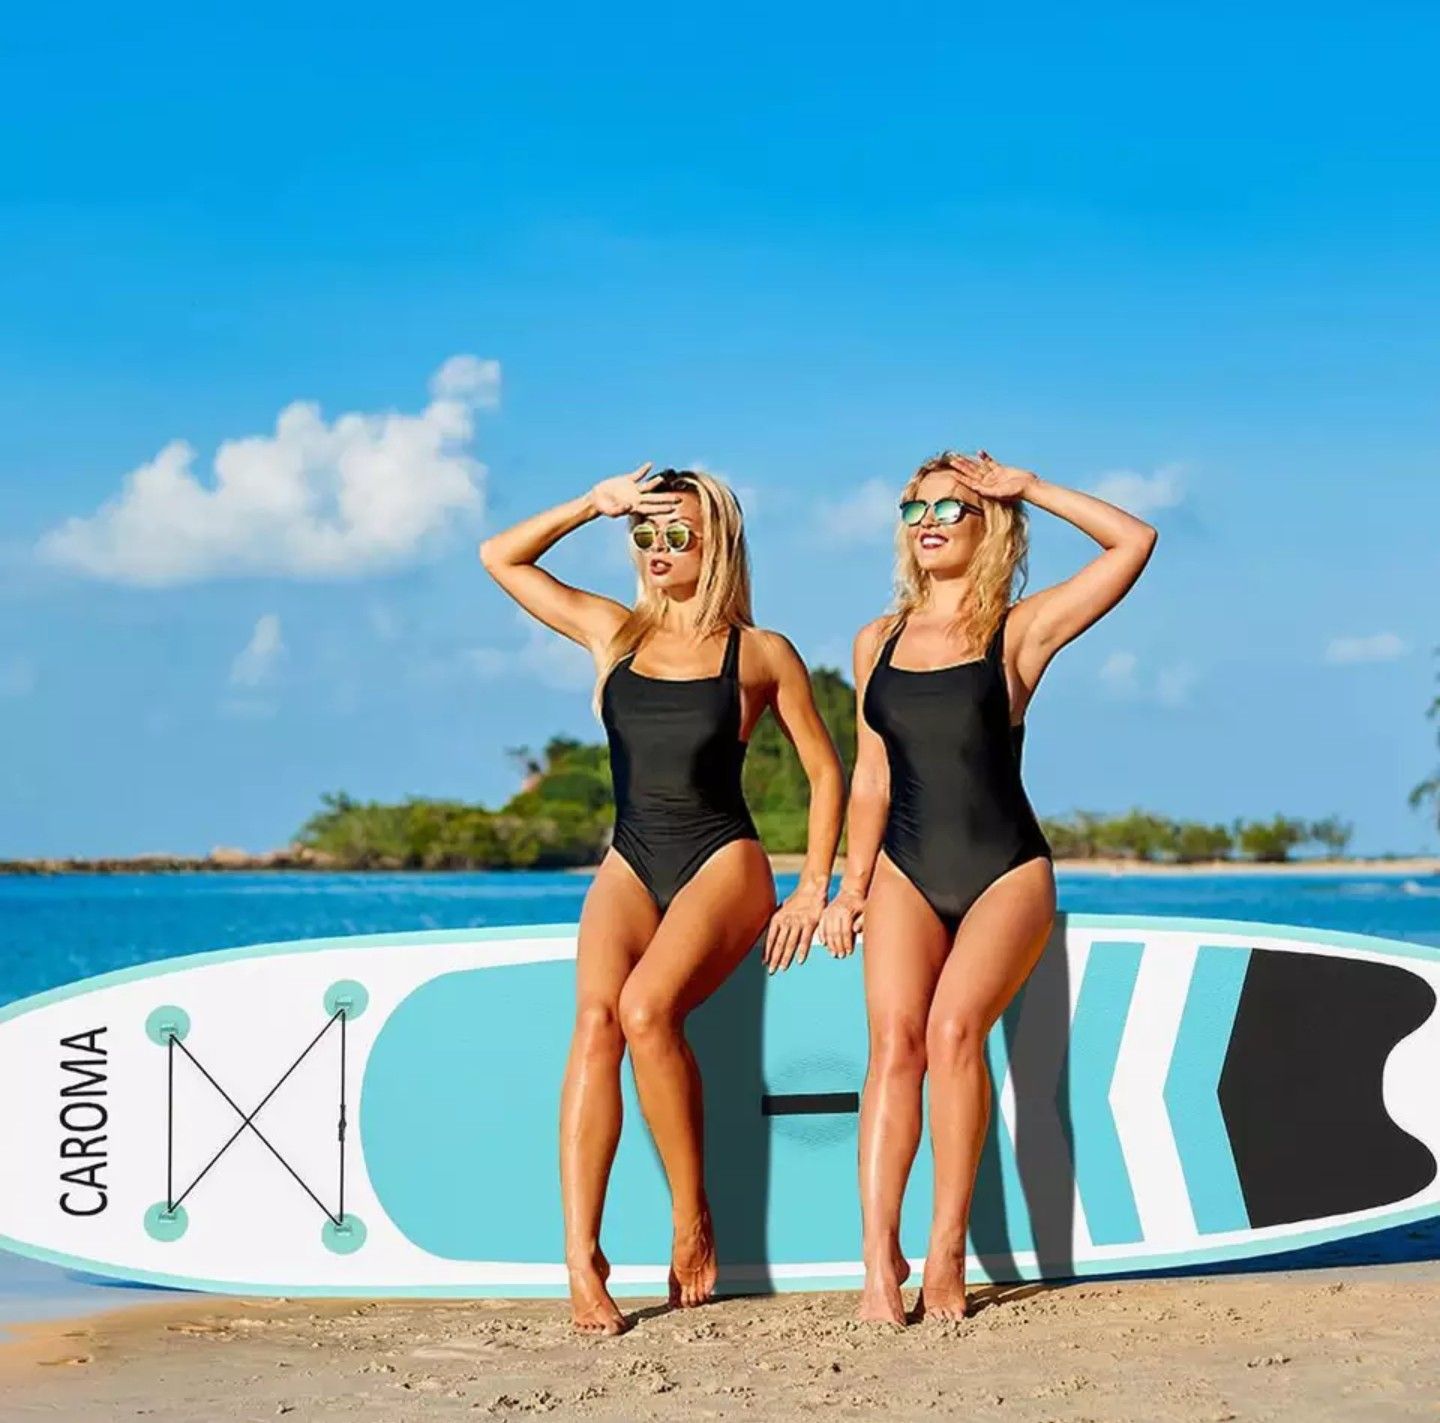 Hot summer item!! Get now before they're gone! Inflatable Stand Up Adult Anti-slip Paddle Board Water Sport Surfing kayak Unisex 305x76x10cm